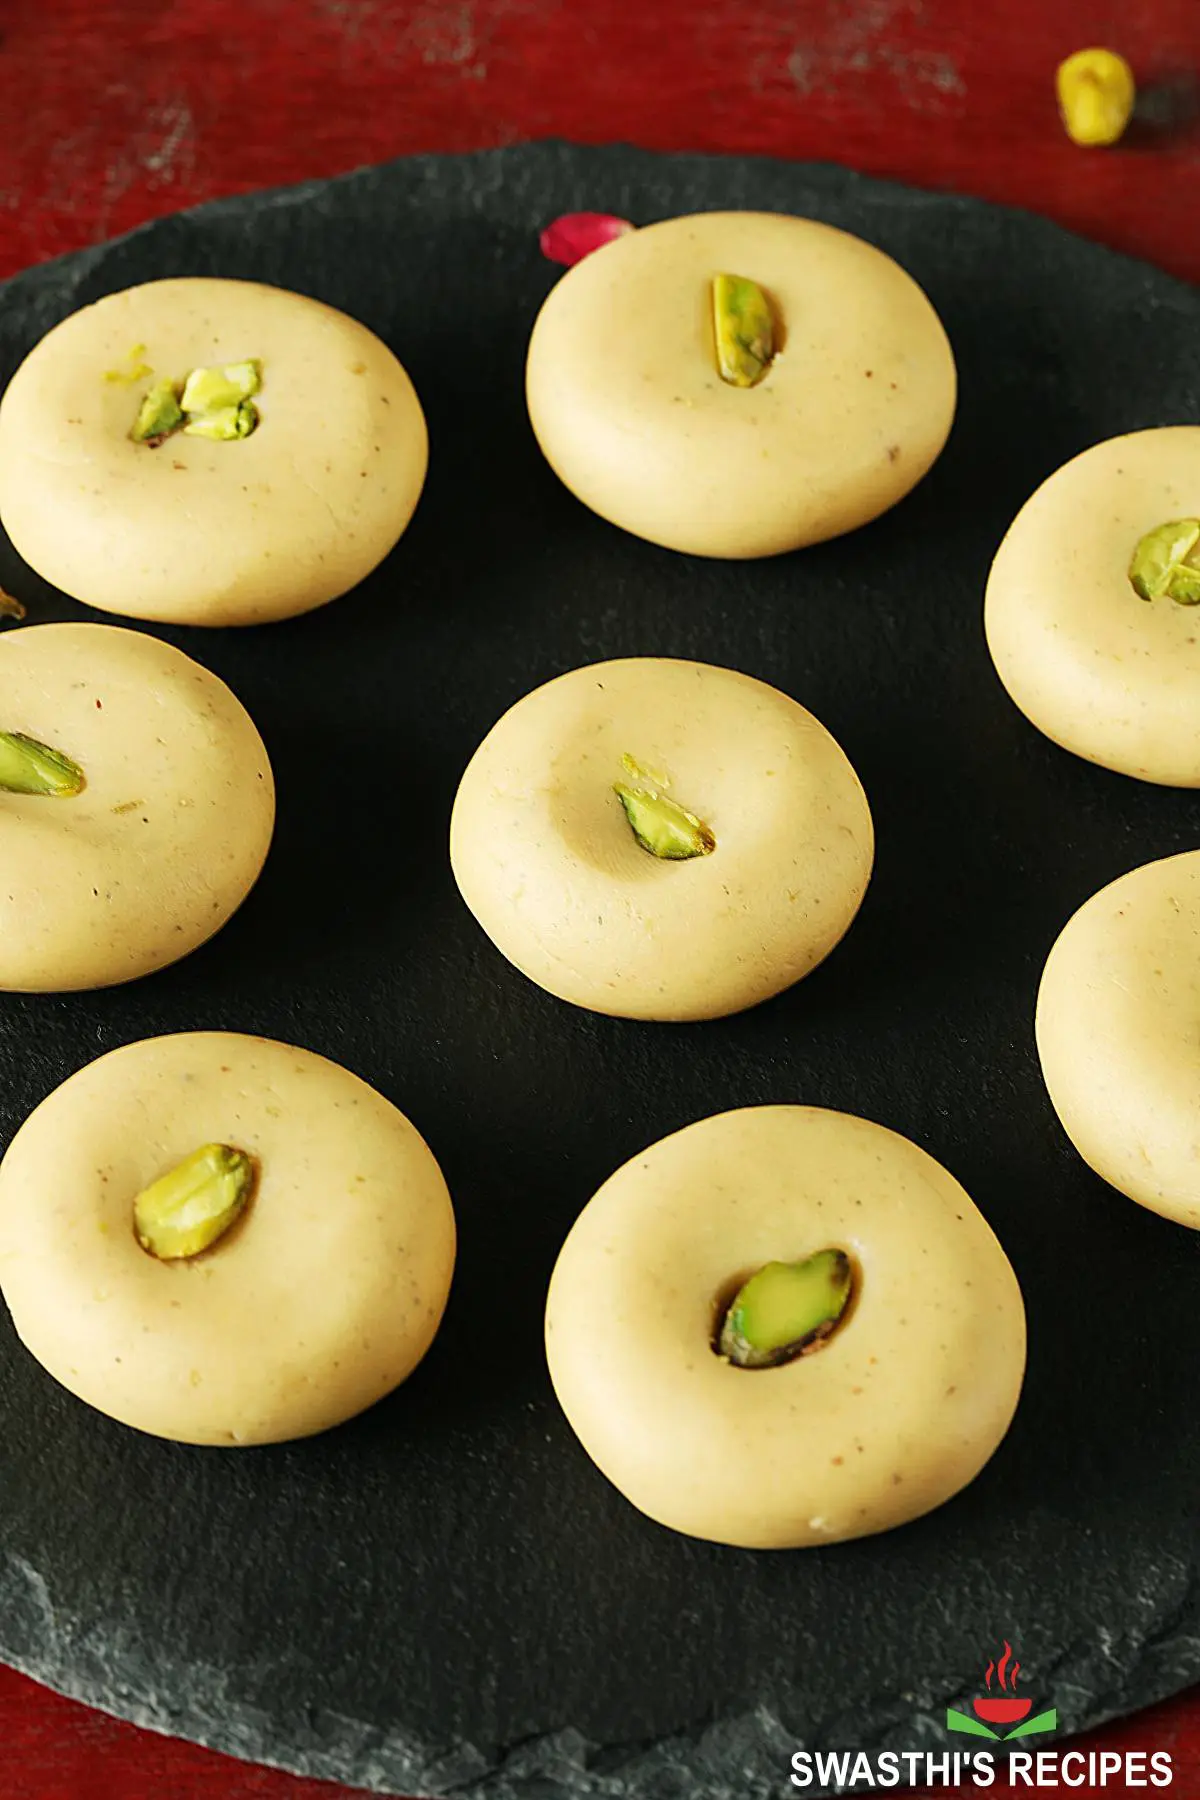 milk peda also known as doodh peda made with milk powder